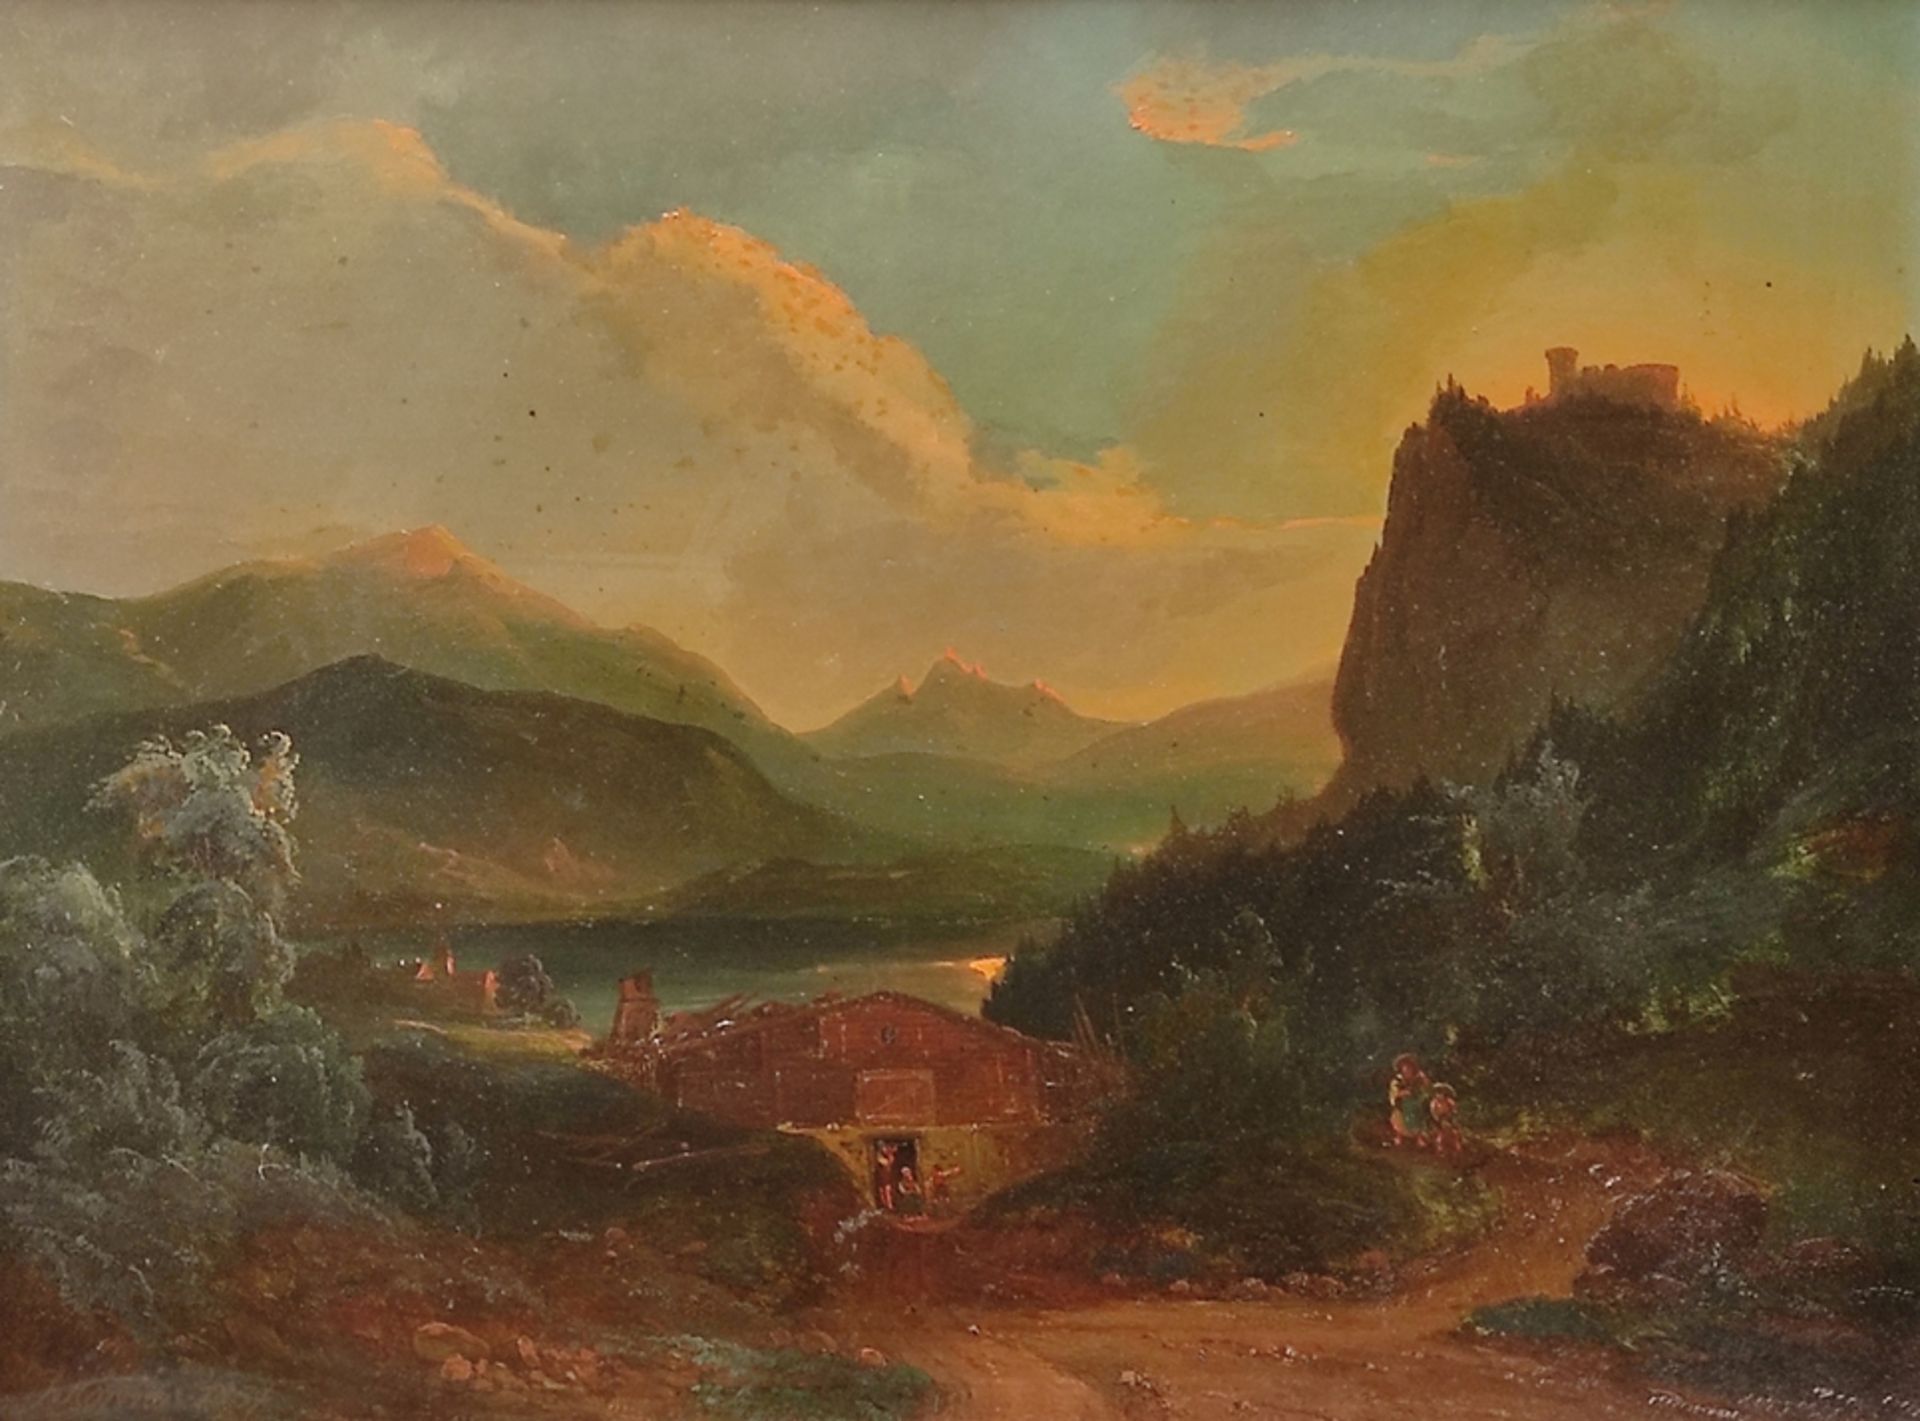 Landscape painter (19th century) "Sunset", with view of waters, wooden houses, on the right mountai